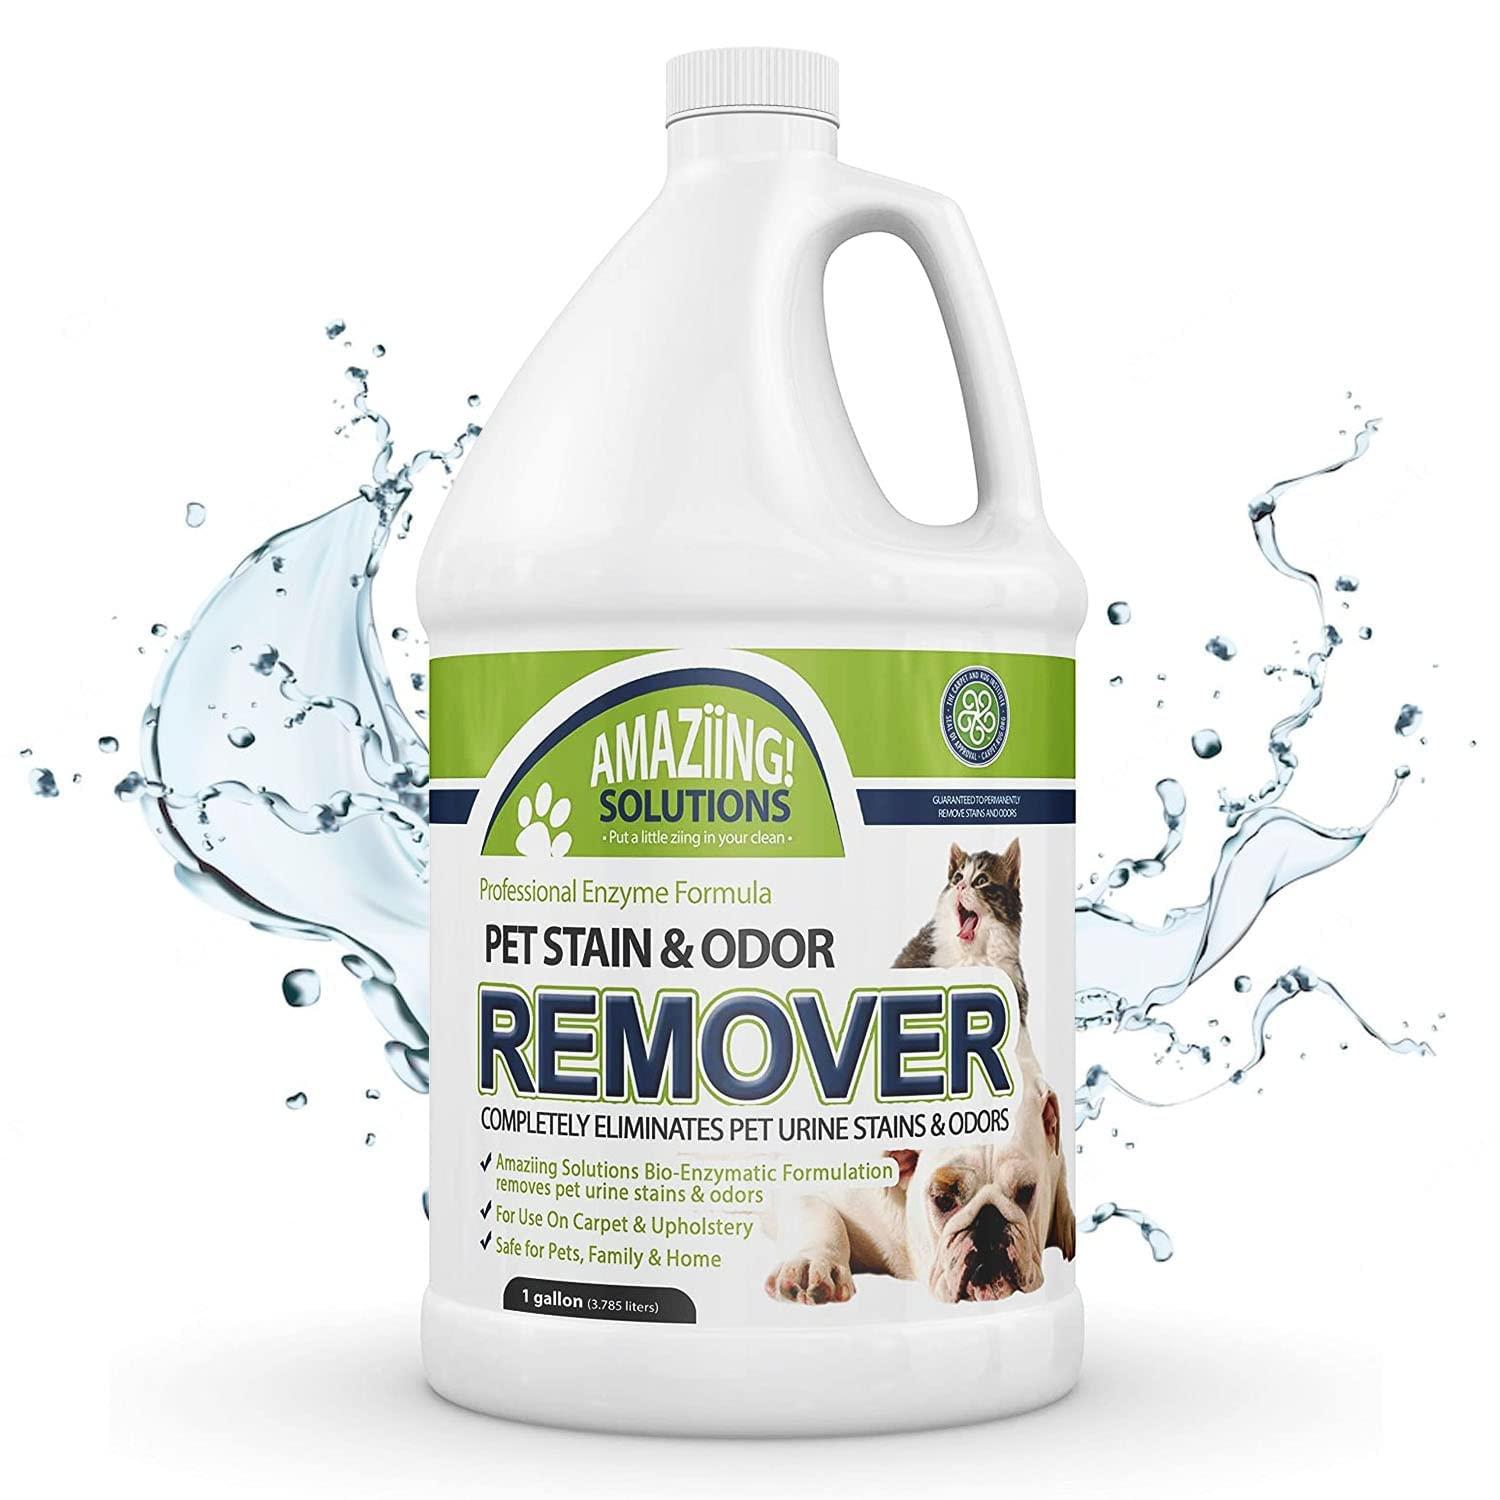 Amaziing Solutions Pet Stain and Odor Remover - Enzyme Cleaner, Pet Urine Odor Eliminator Refill - Floor & Carpet Cleaner, Pet Deodorizers For Home, Fabric Freshener W/Fresh, Clean Scent, 1 Gallon